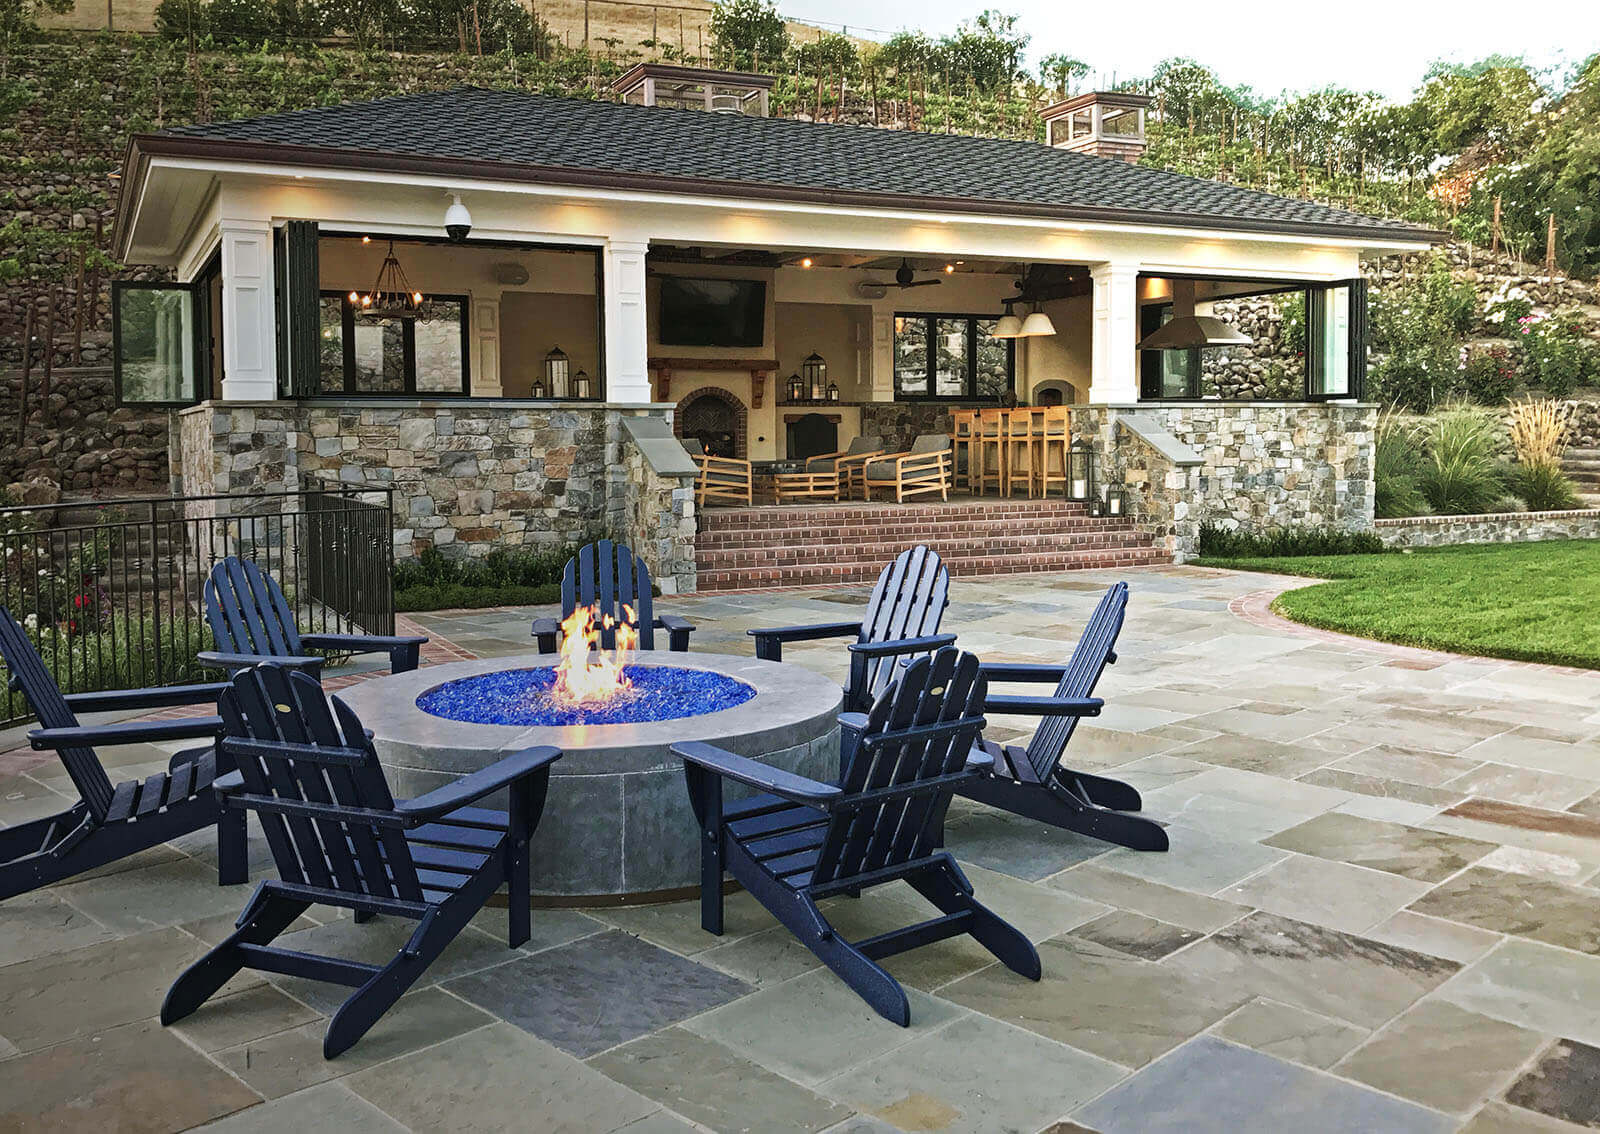 Hillside cabana with dining, kitchen, lounge, bar, and hearth opens onto a bluestone patio with blue glass fire pit and blue Adirondack chairs